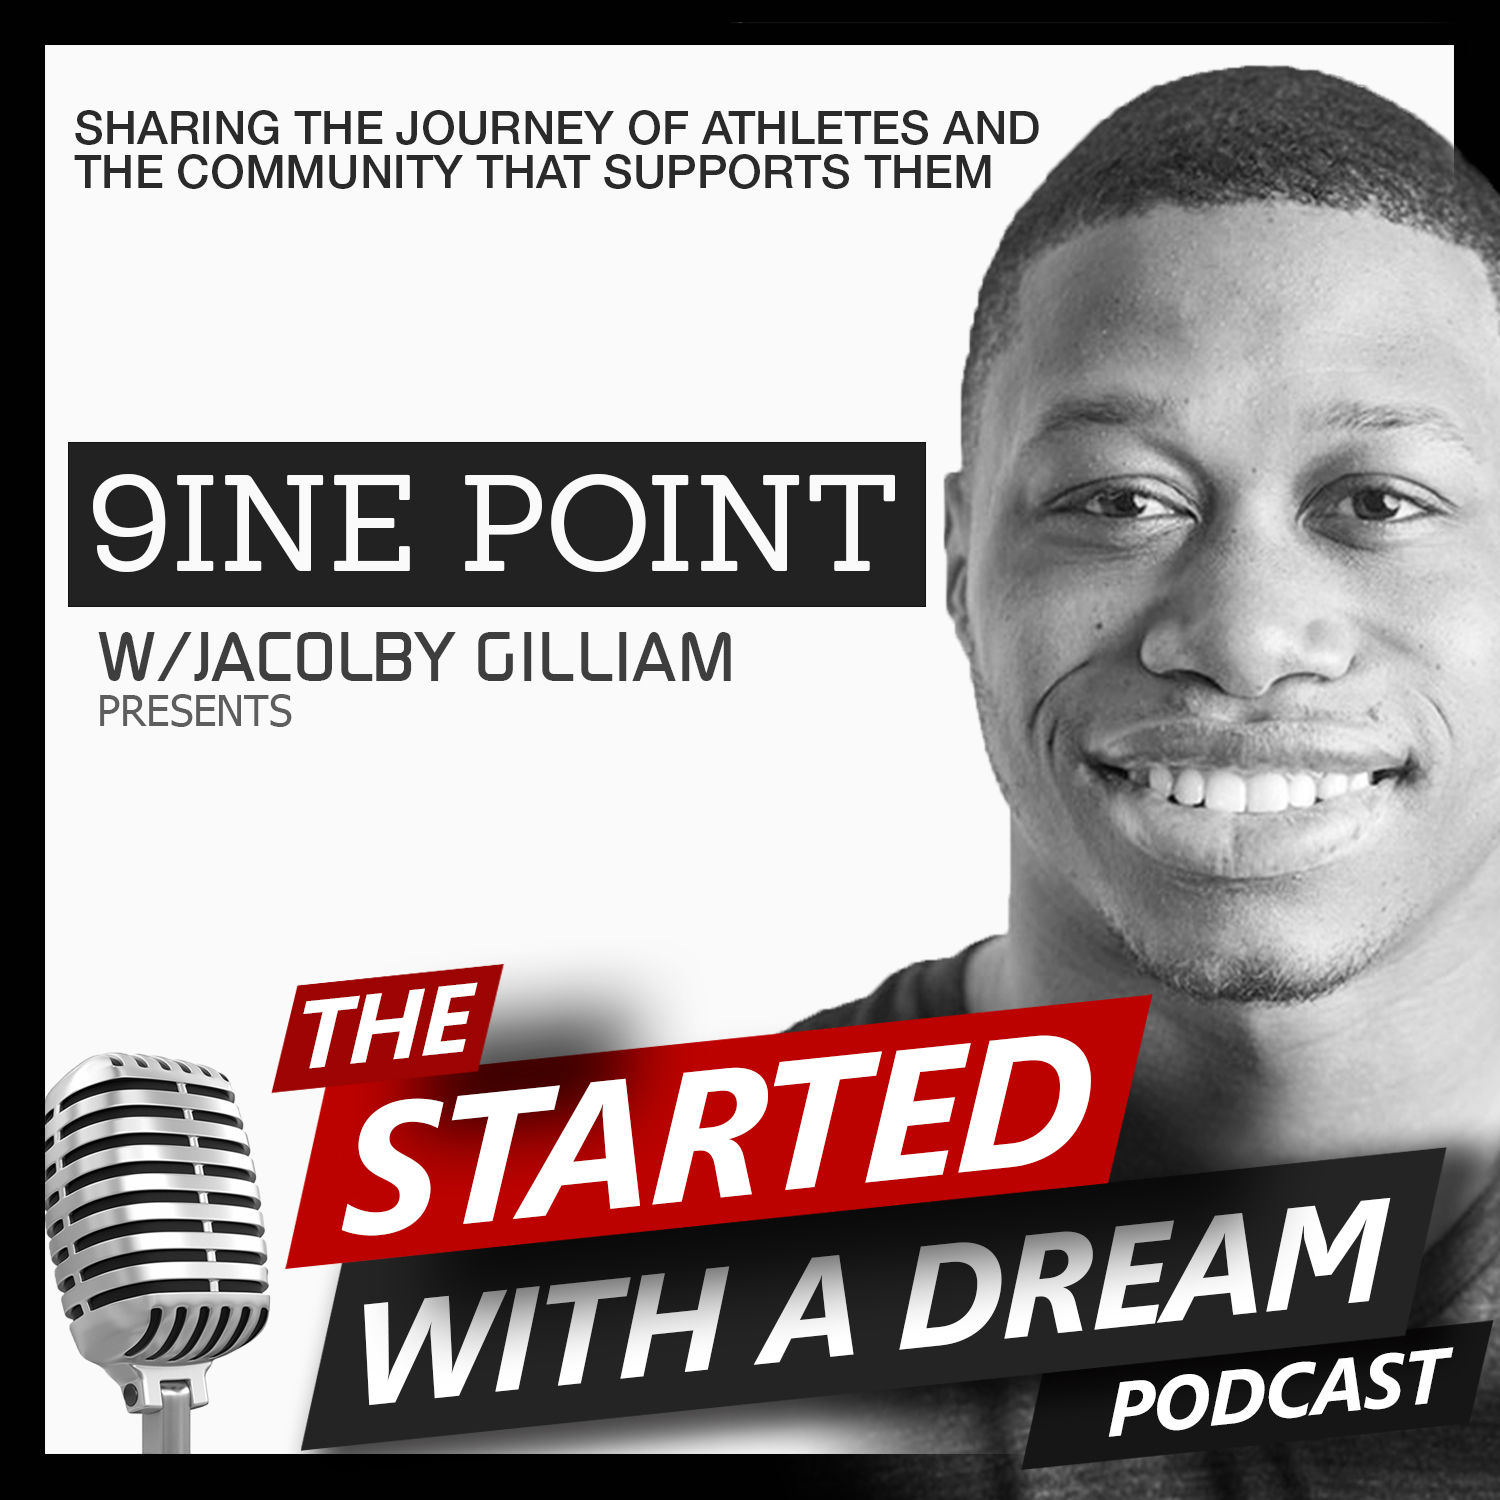 9INE POINT Started With A Dream Podcast